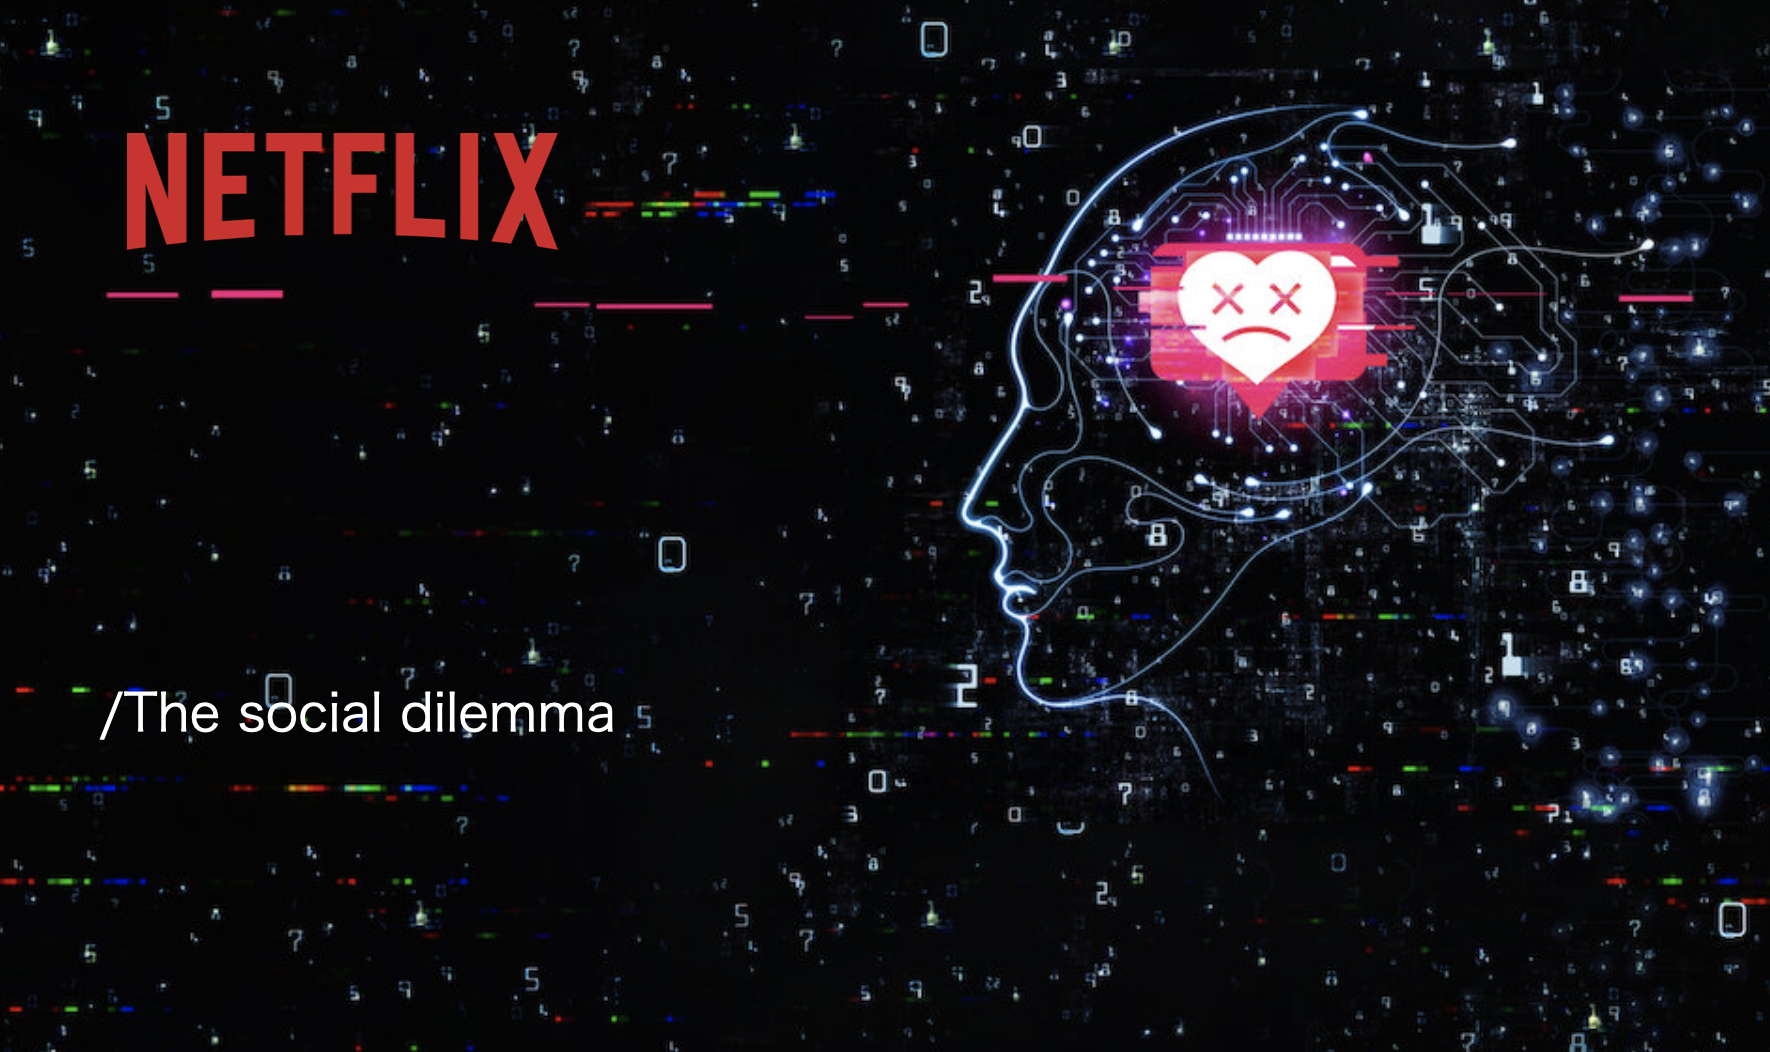 A CONUNDRUM? - Review of the Social Dilemma Documentary on Netflix